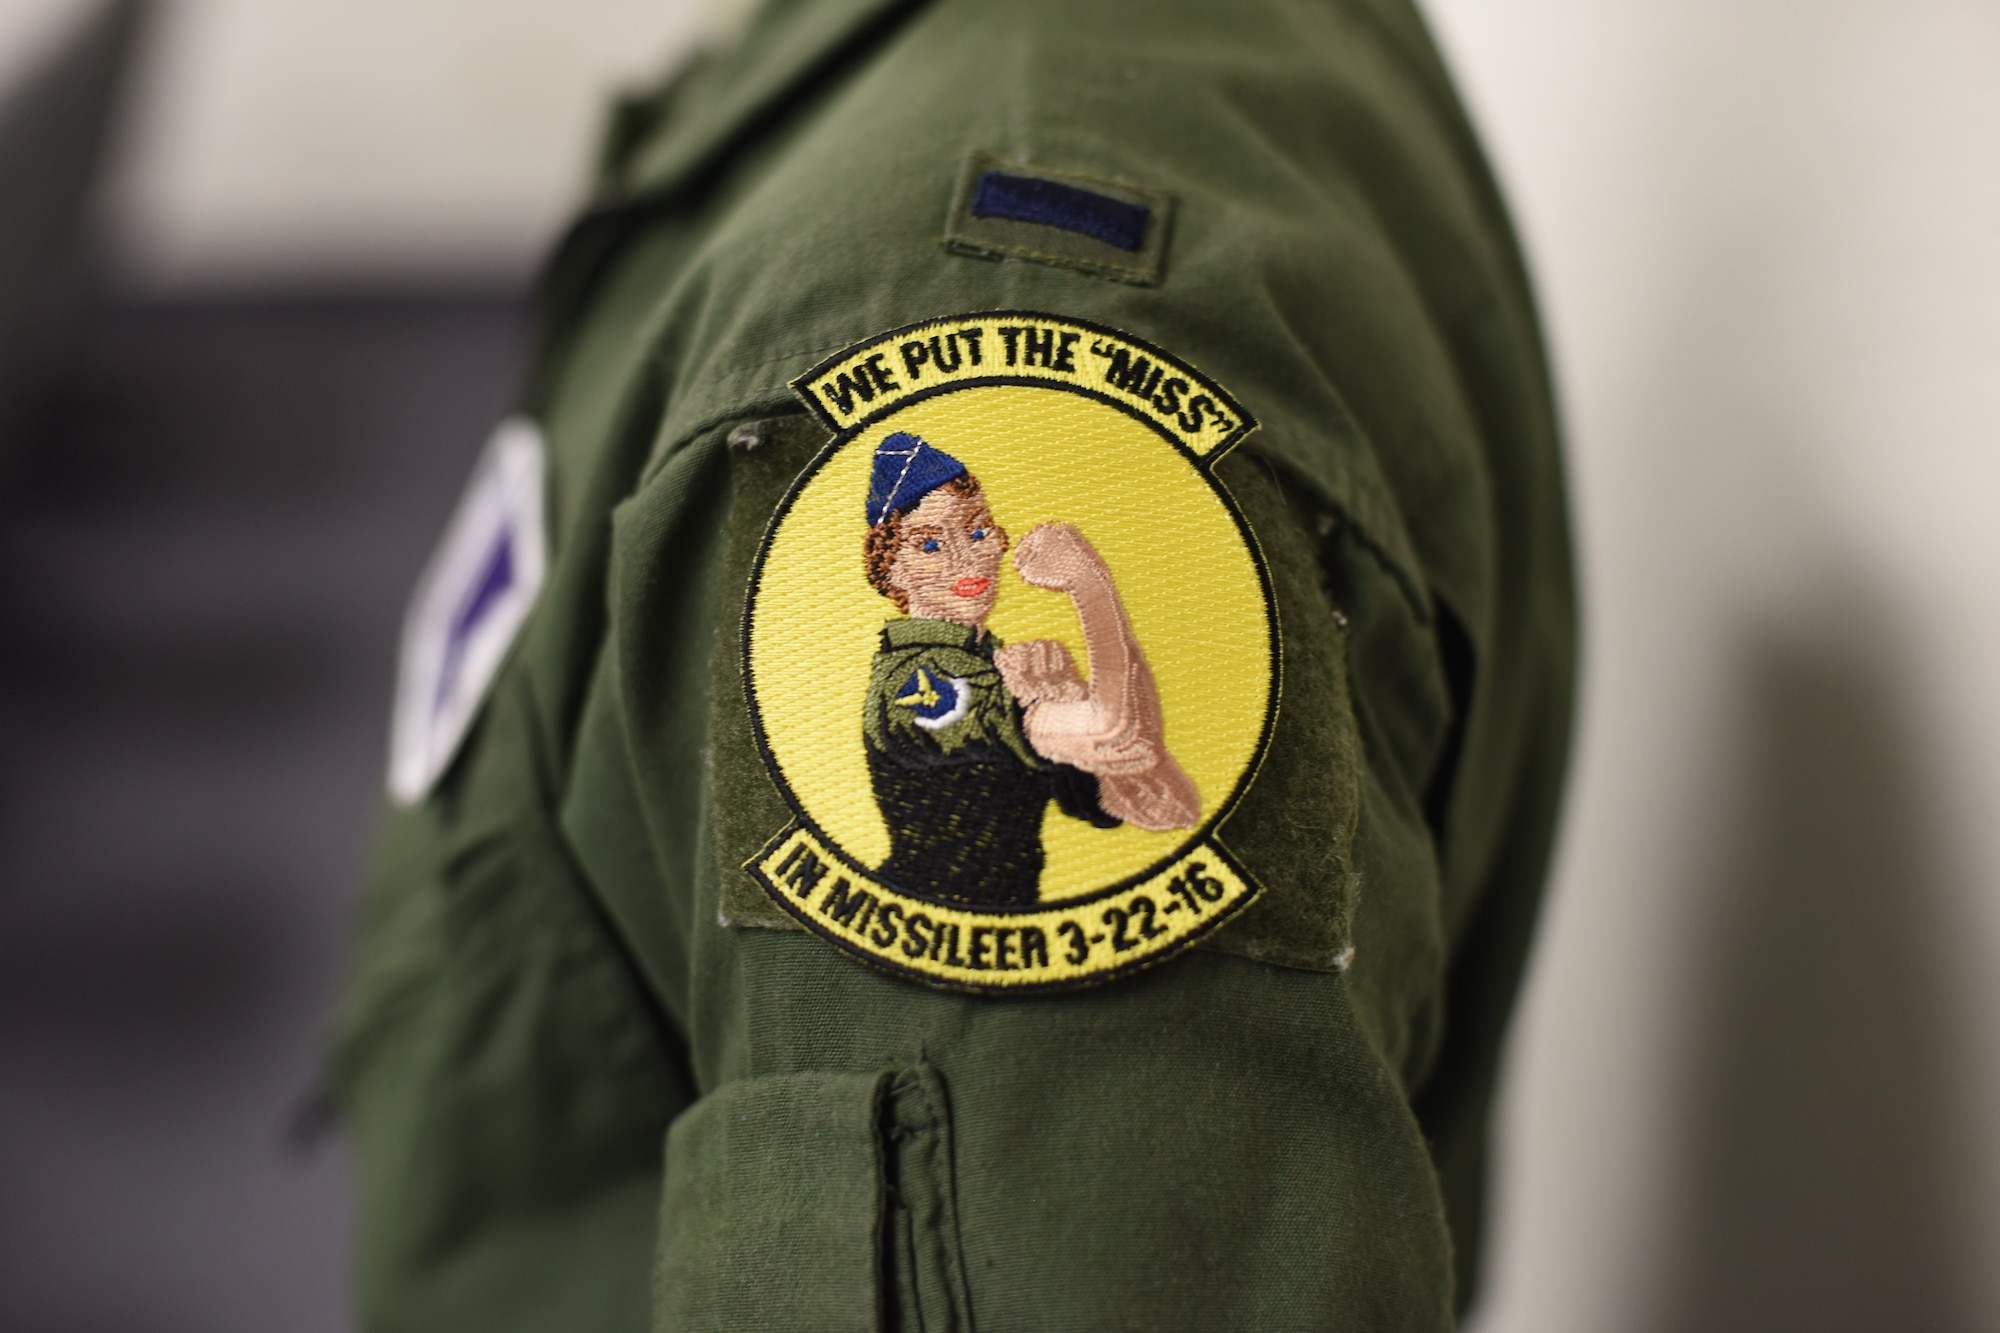 A missileer from Malmstrom Air Force Base, Mont., presents her patch after a training session at the missile procedures trainer March 21, 2016. According to the U.S. Census Bureau, women make up almost 51 percent of the nation’s population. Women currently make up 19 percent of the Air Force, the highest of any service. (U.S. Air Force photo/Airman Collin Schmidt)